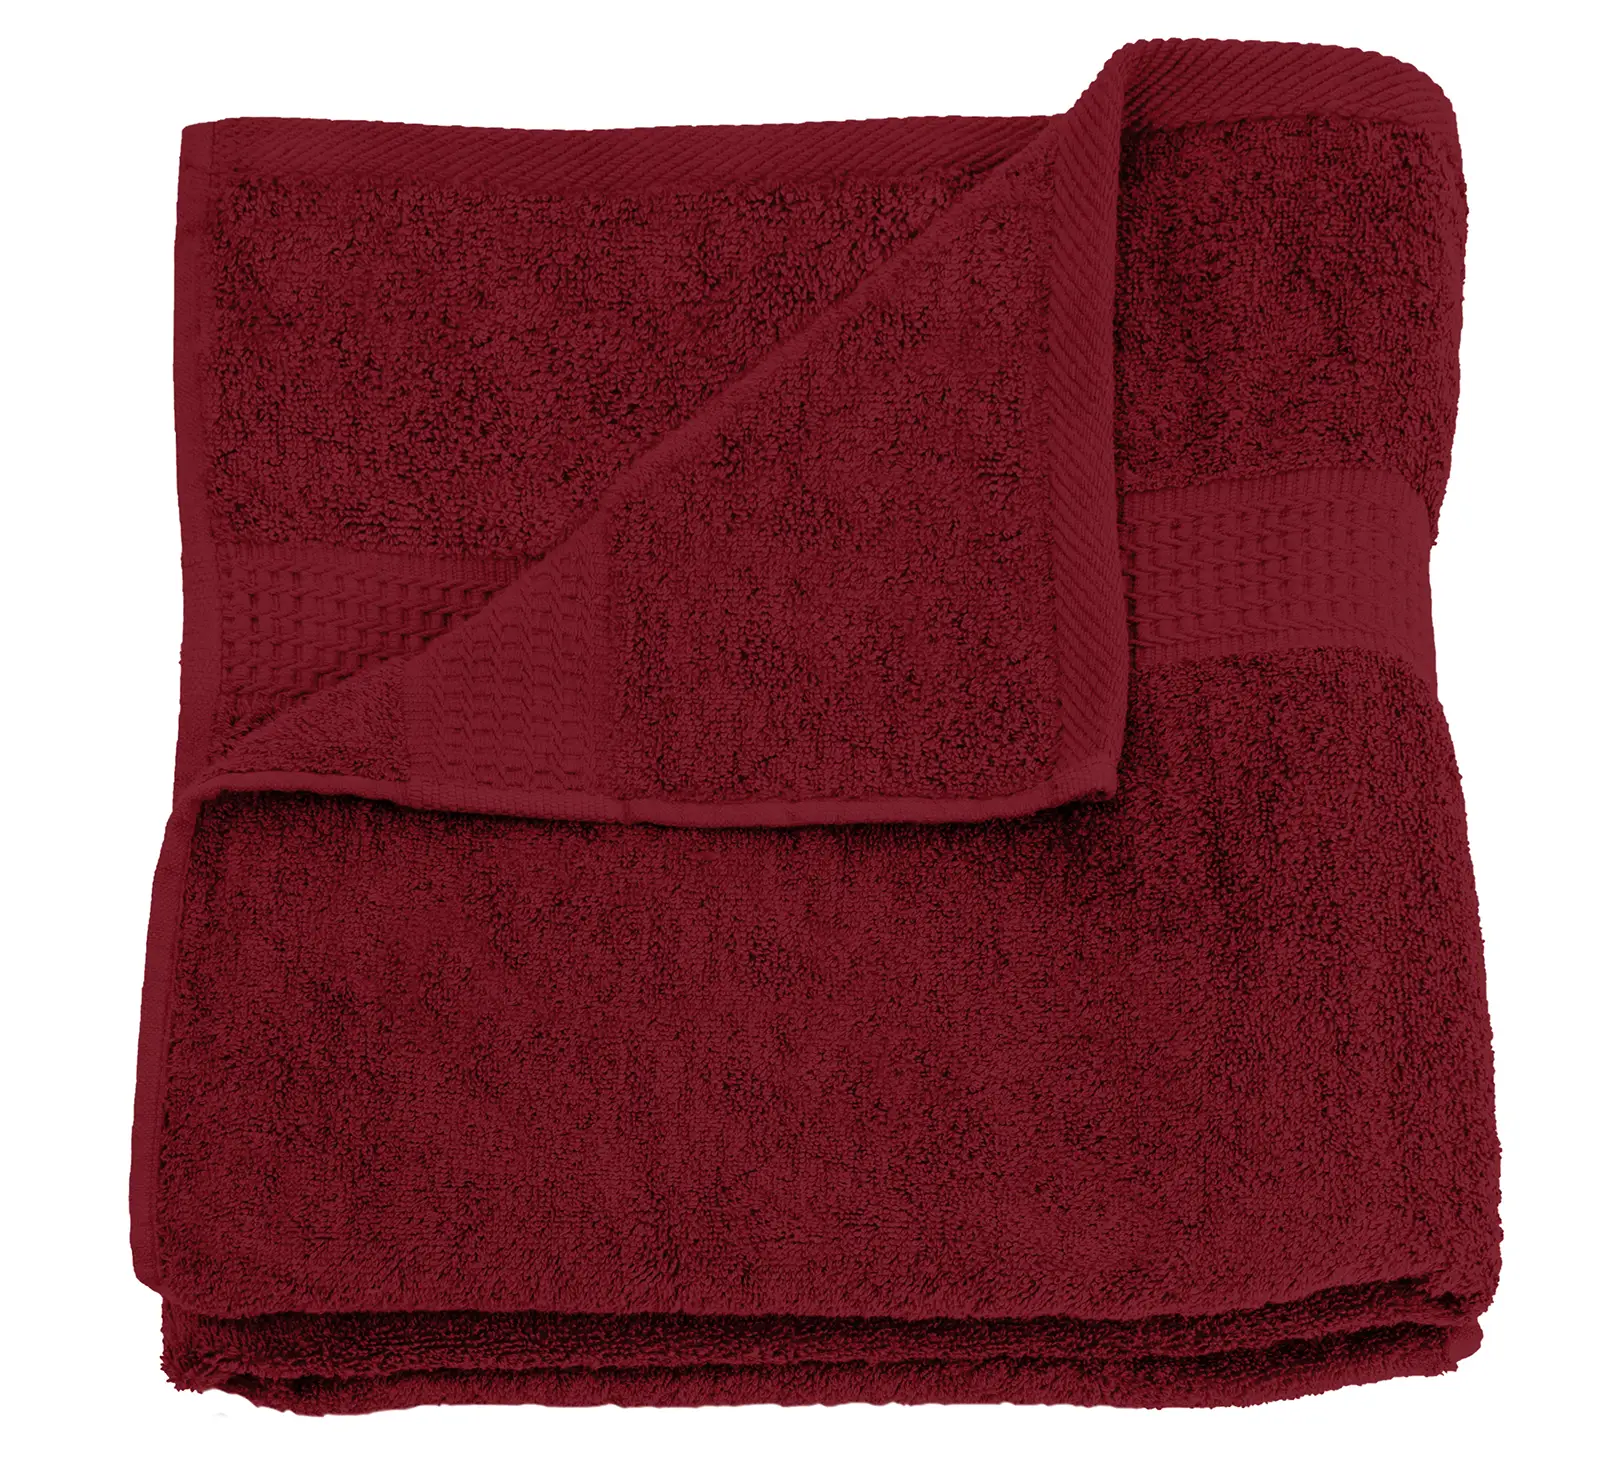 Badetuch bordeaux 100x150 cm Frottee